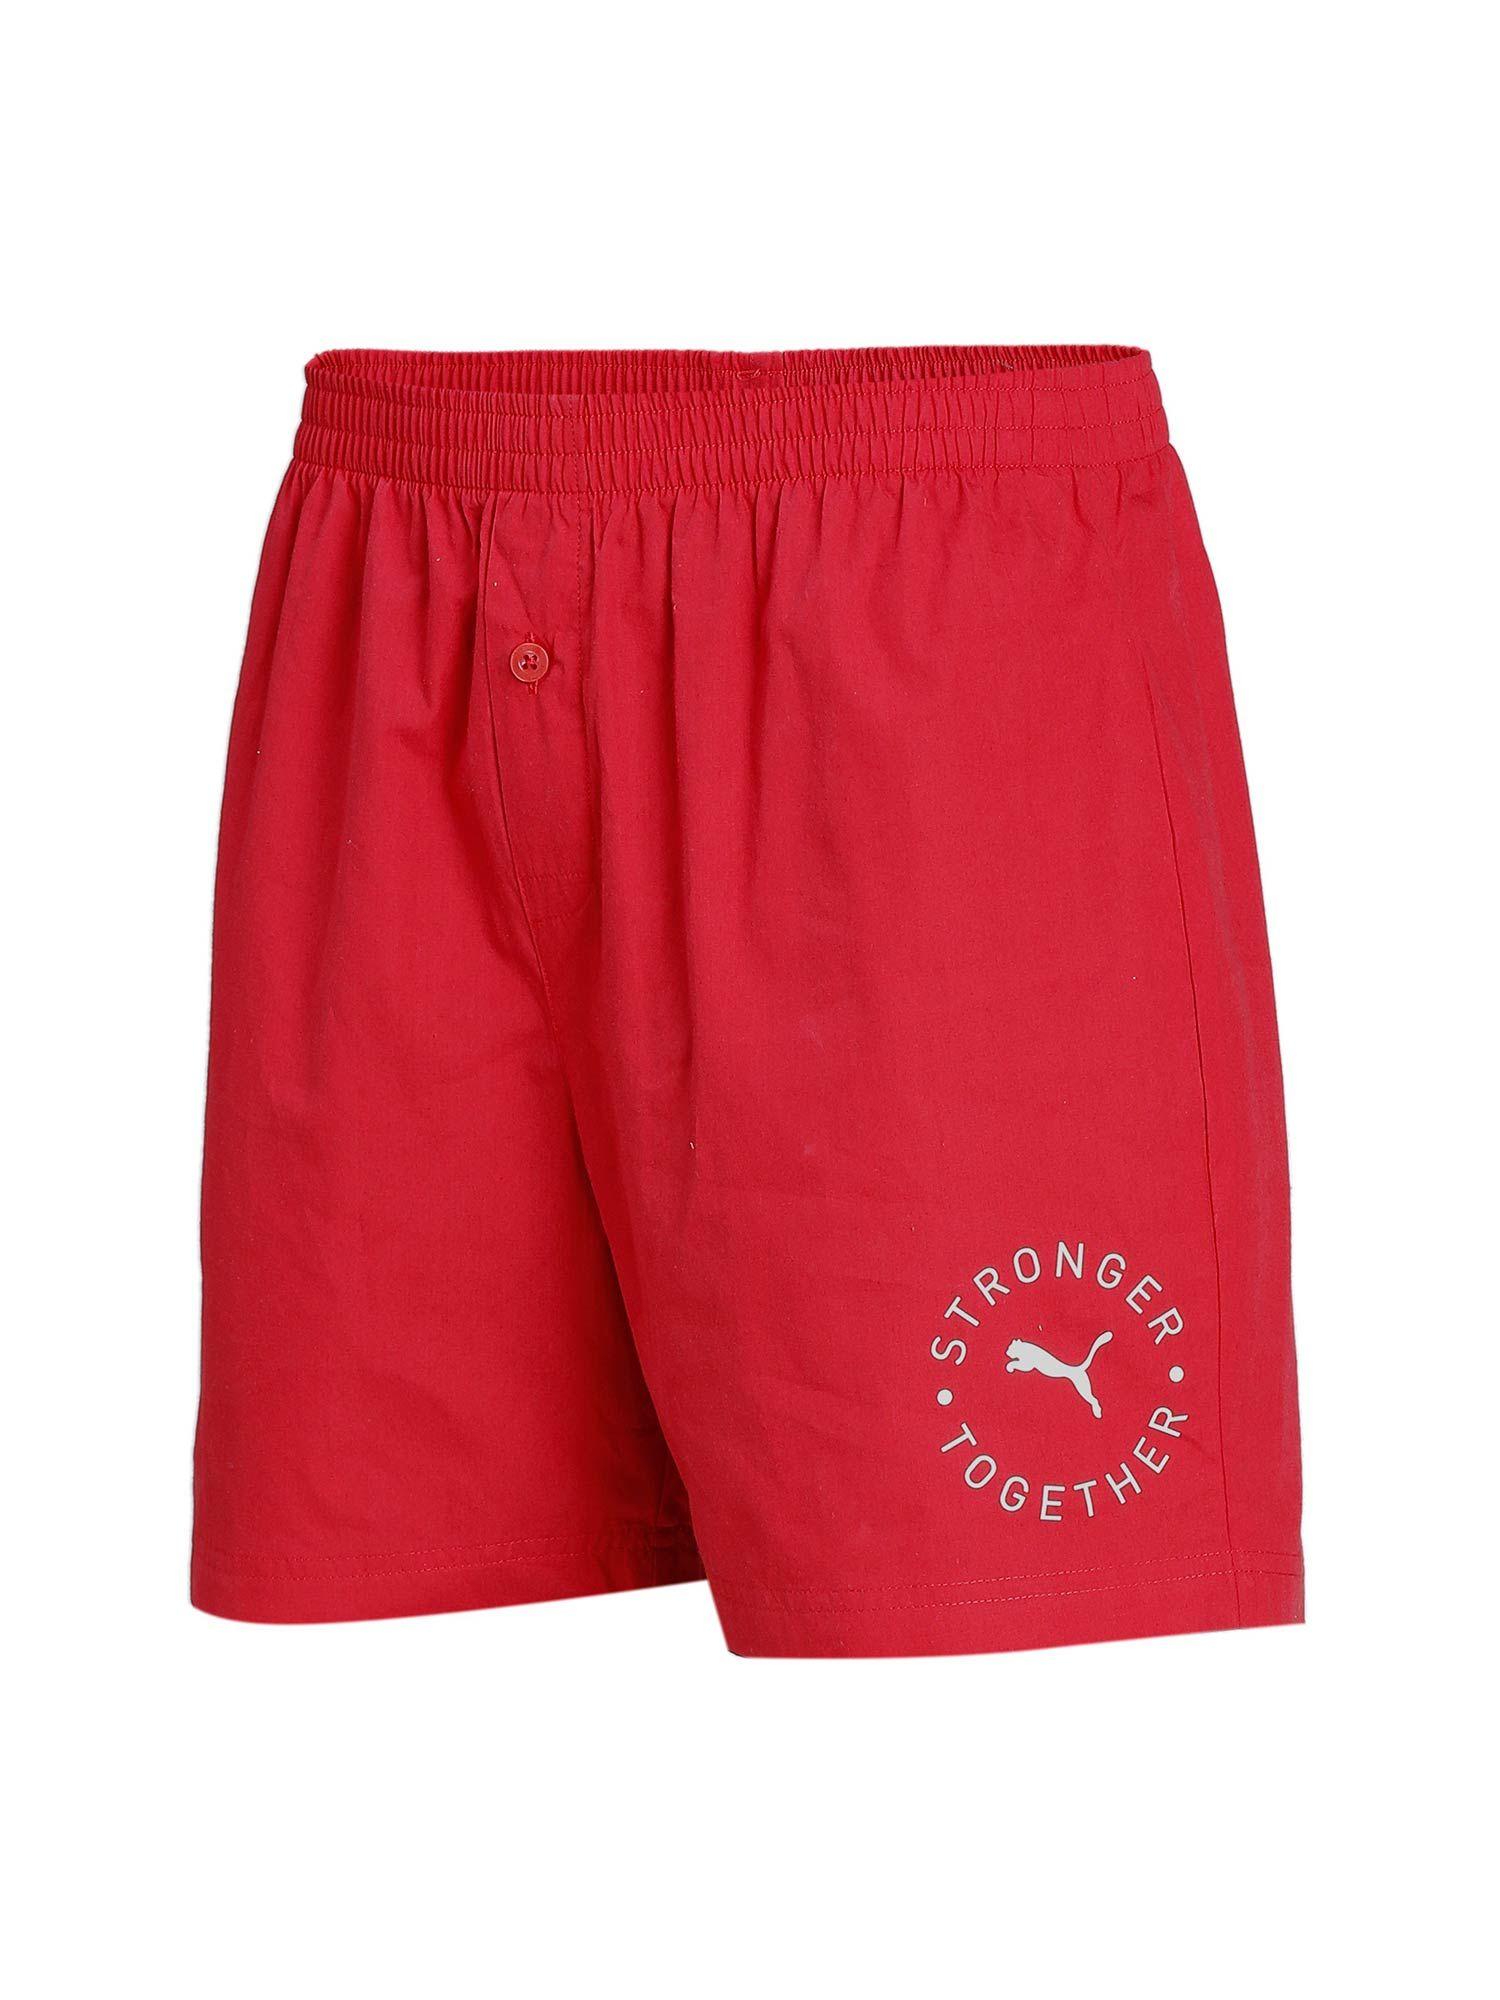 stretch mens red basic boxer